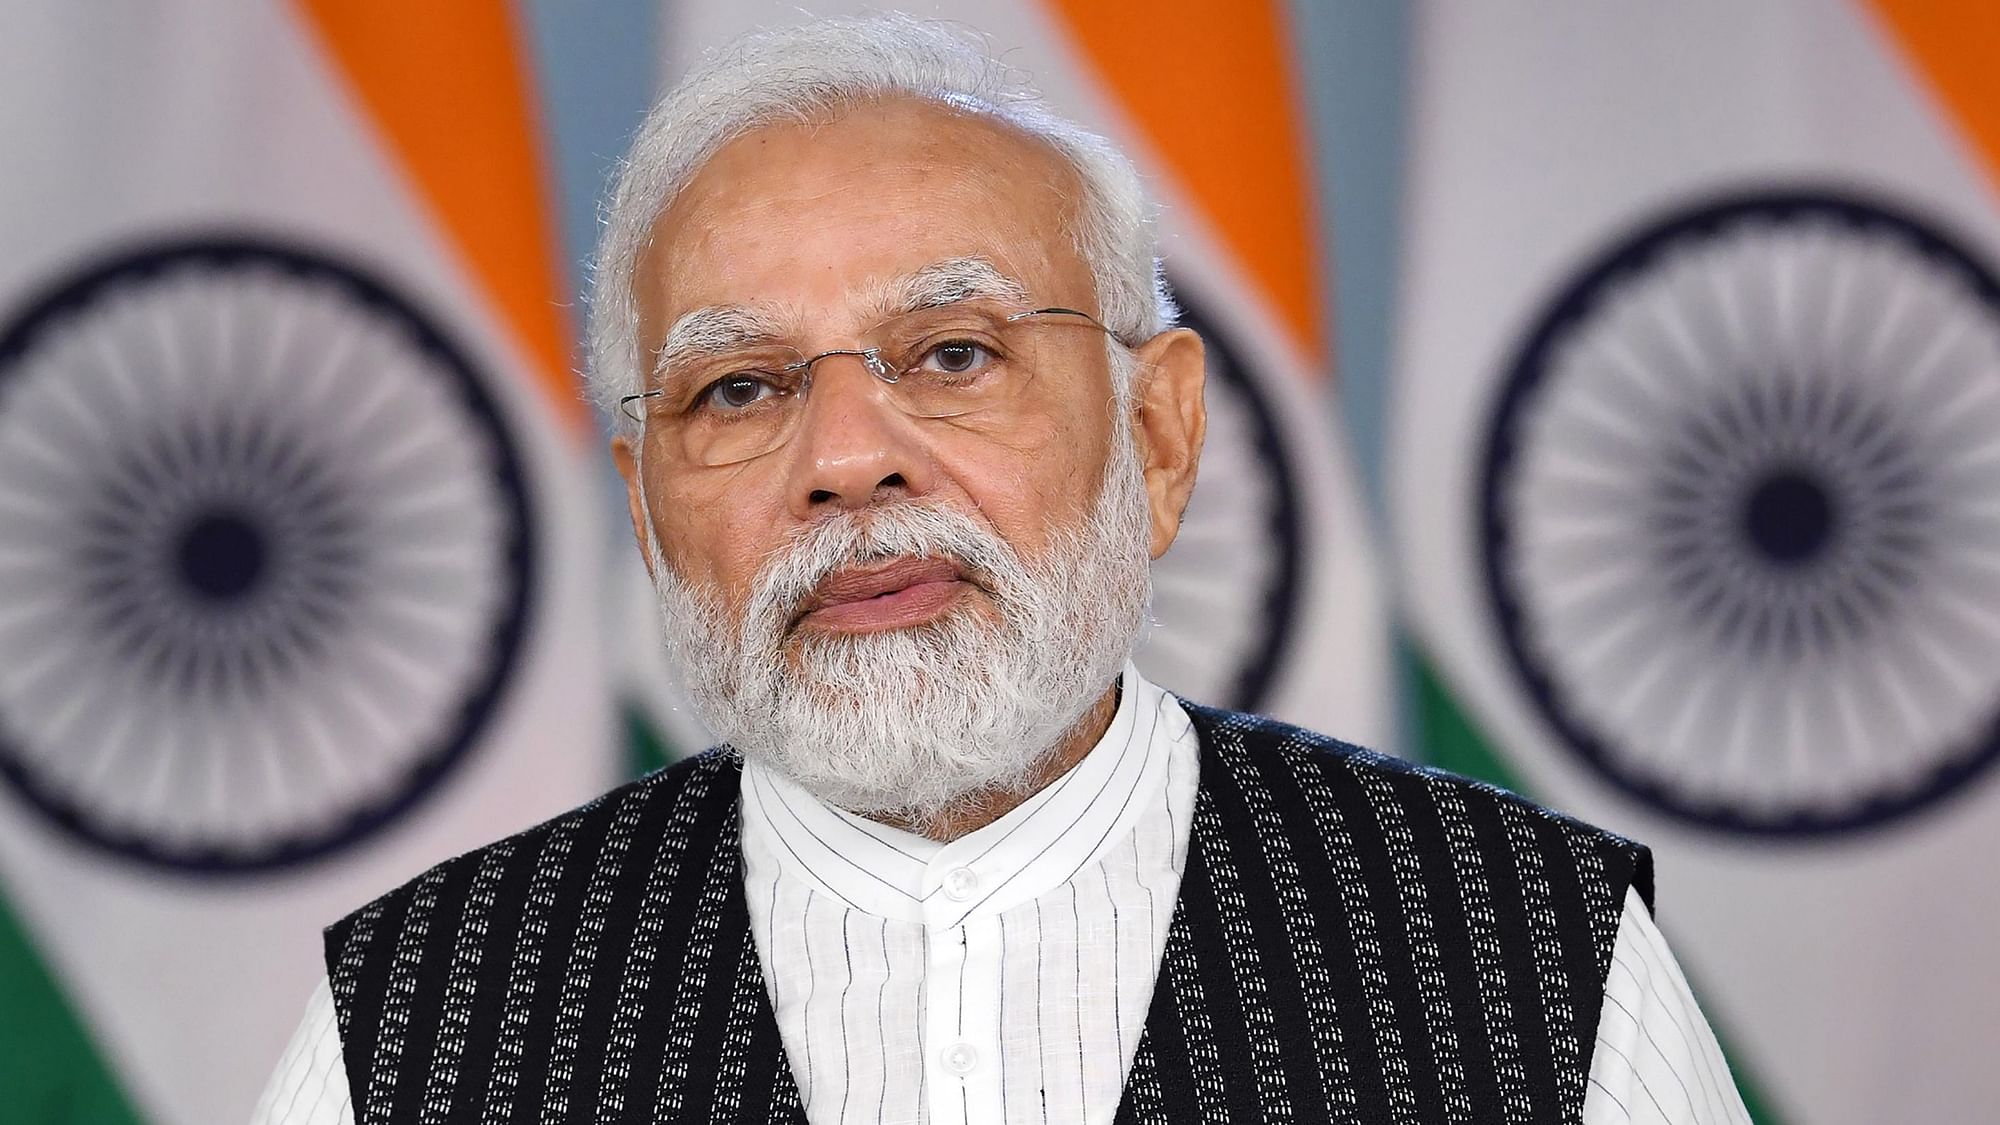 <div class="paragraphs"><p>The ongoing shortages of fuel, food grains, and fertilisers are a matter of "great concern", PM Modi said in his virtual address at the <a href="https://www.thequint.com/news/hot-news/eastern-economic-forum-2019-to-have-50-business-events">Eastern Economic Forum</a>.</p></div>